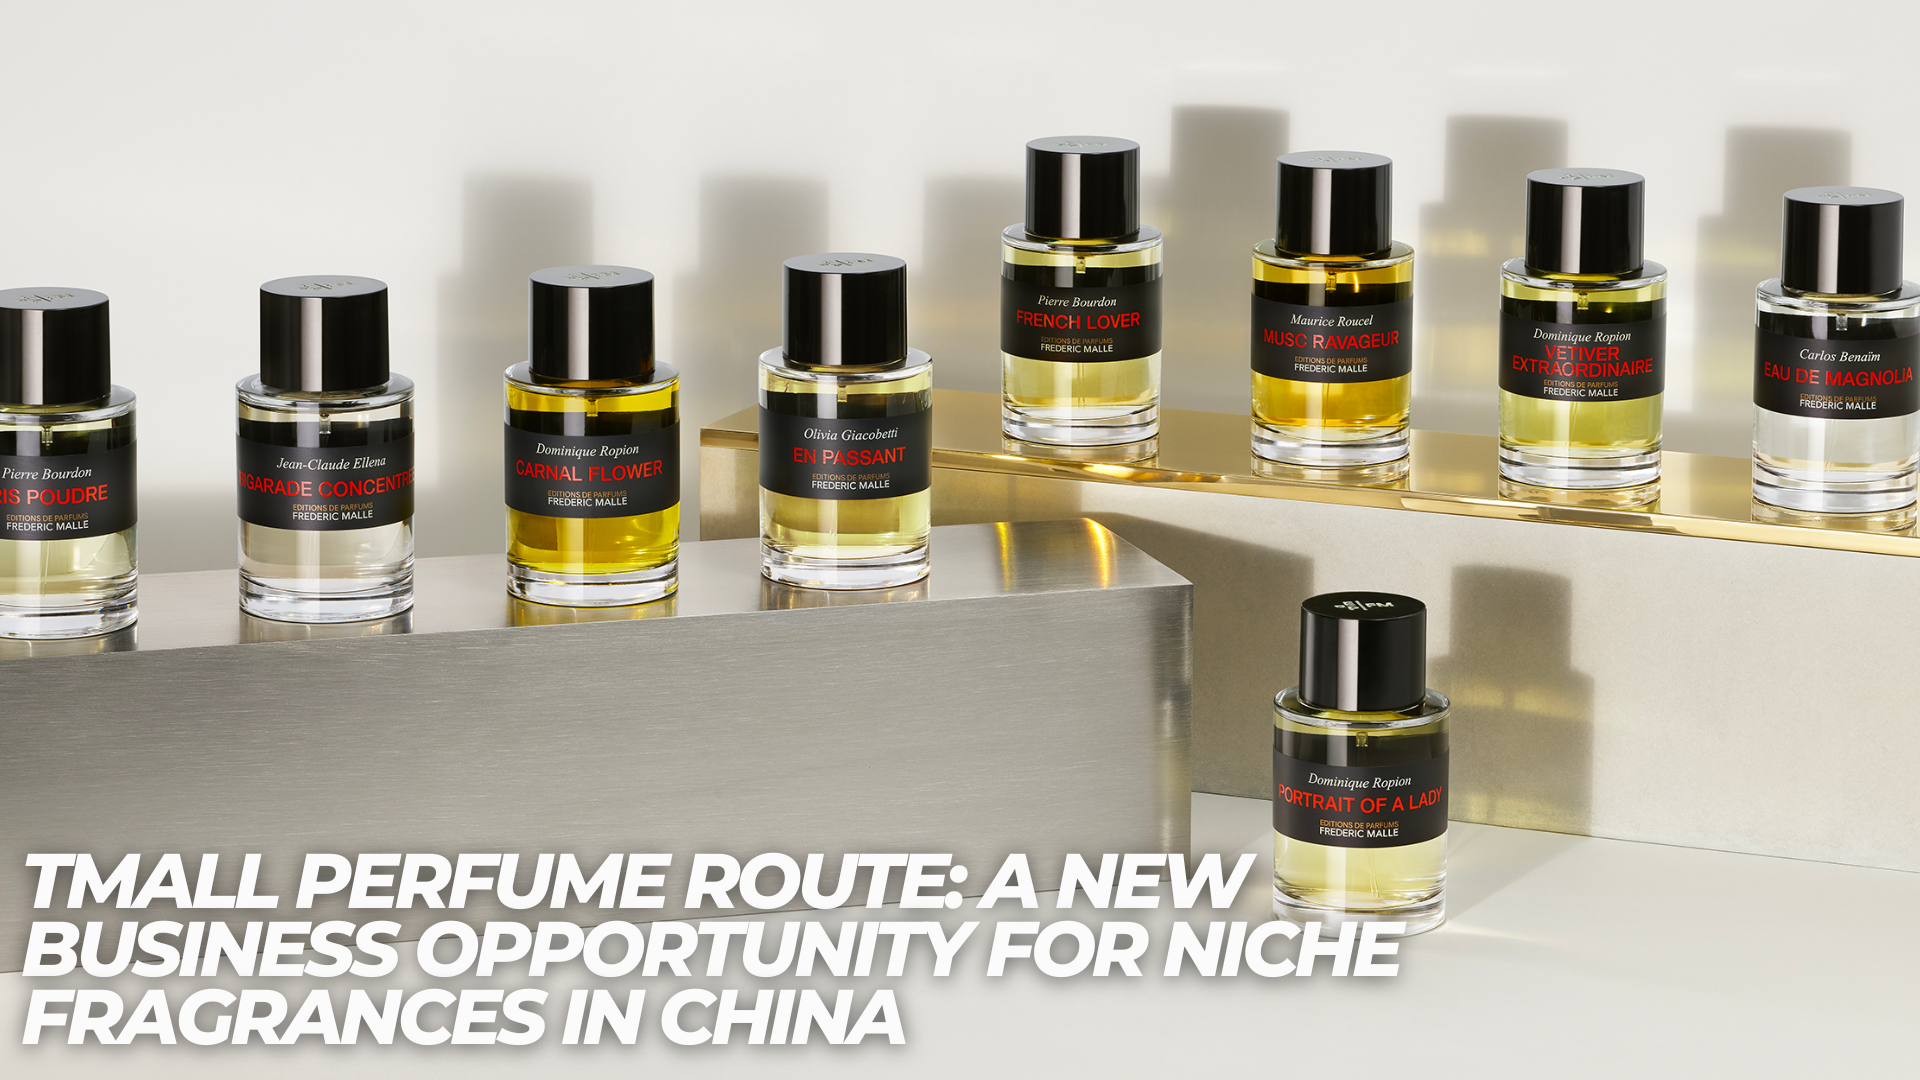 Tmall Perfume Route: A New Business Opportunity for Niche